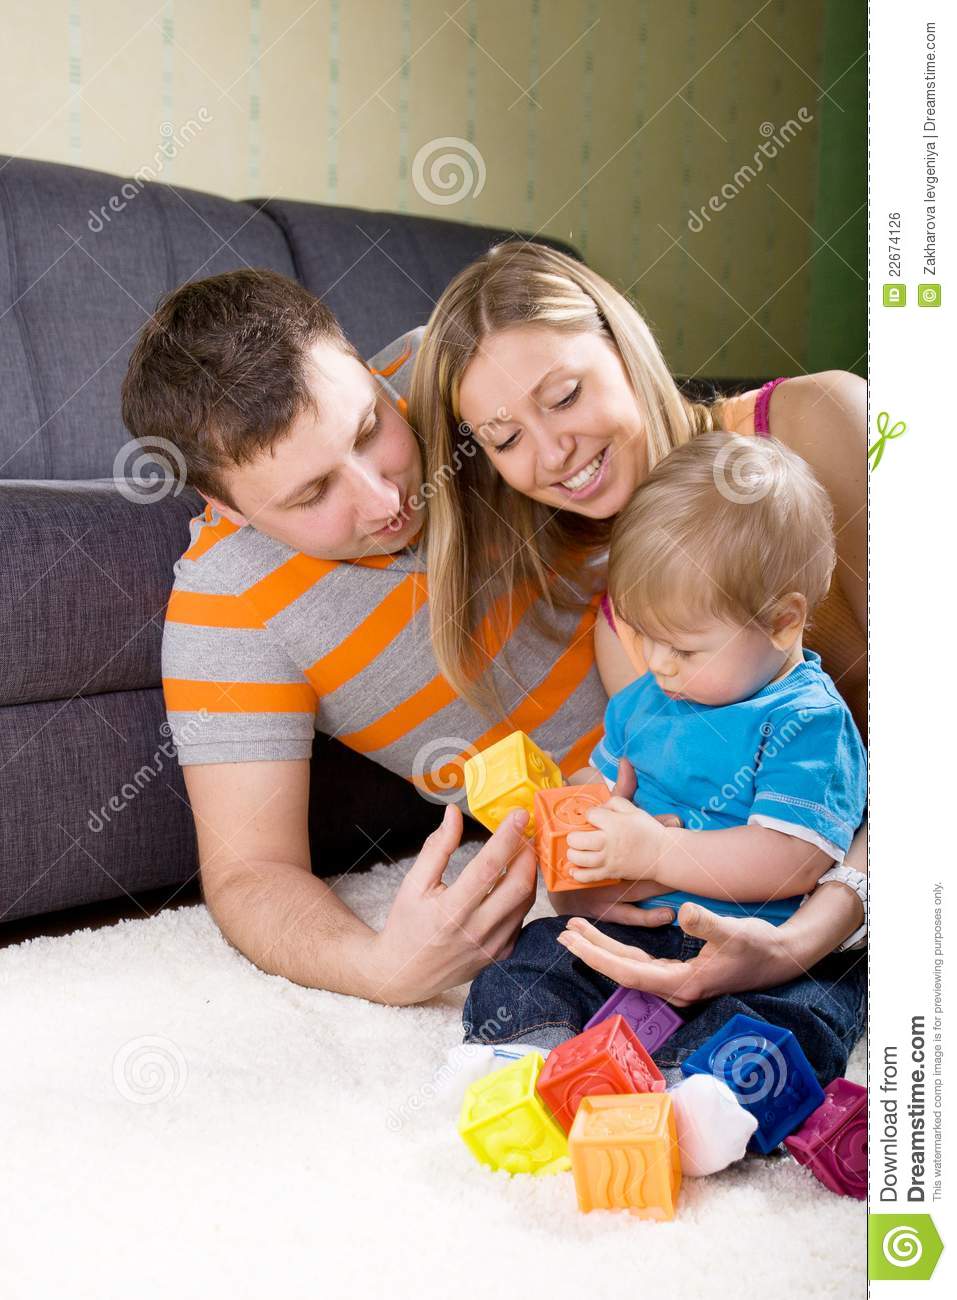 Family Playing Together  Royalty Free Stock Image   Image  22674126